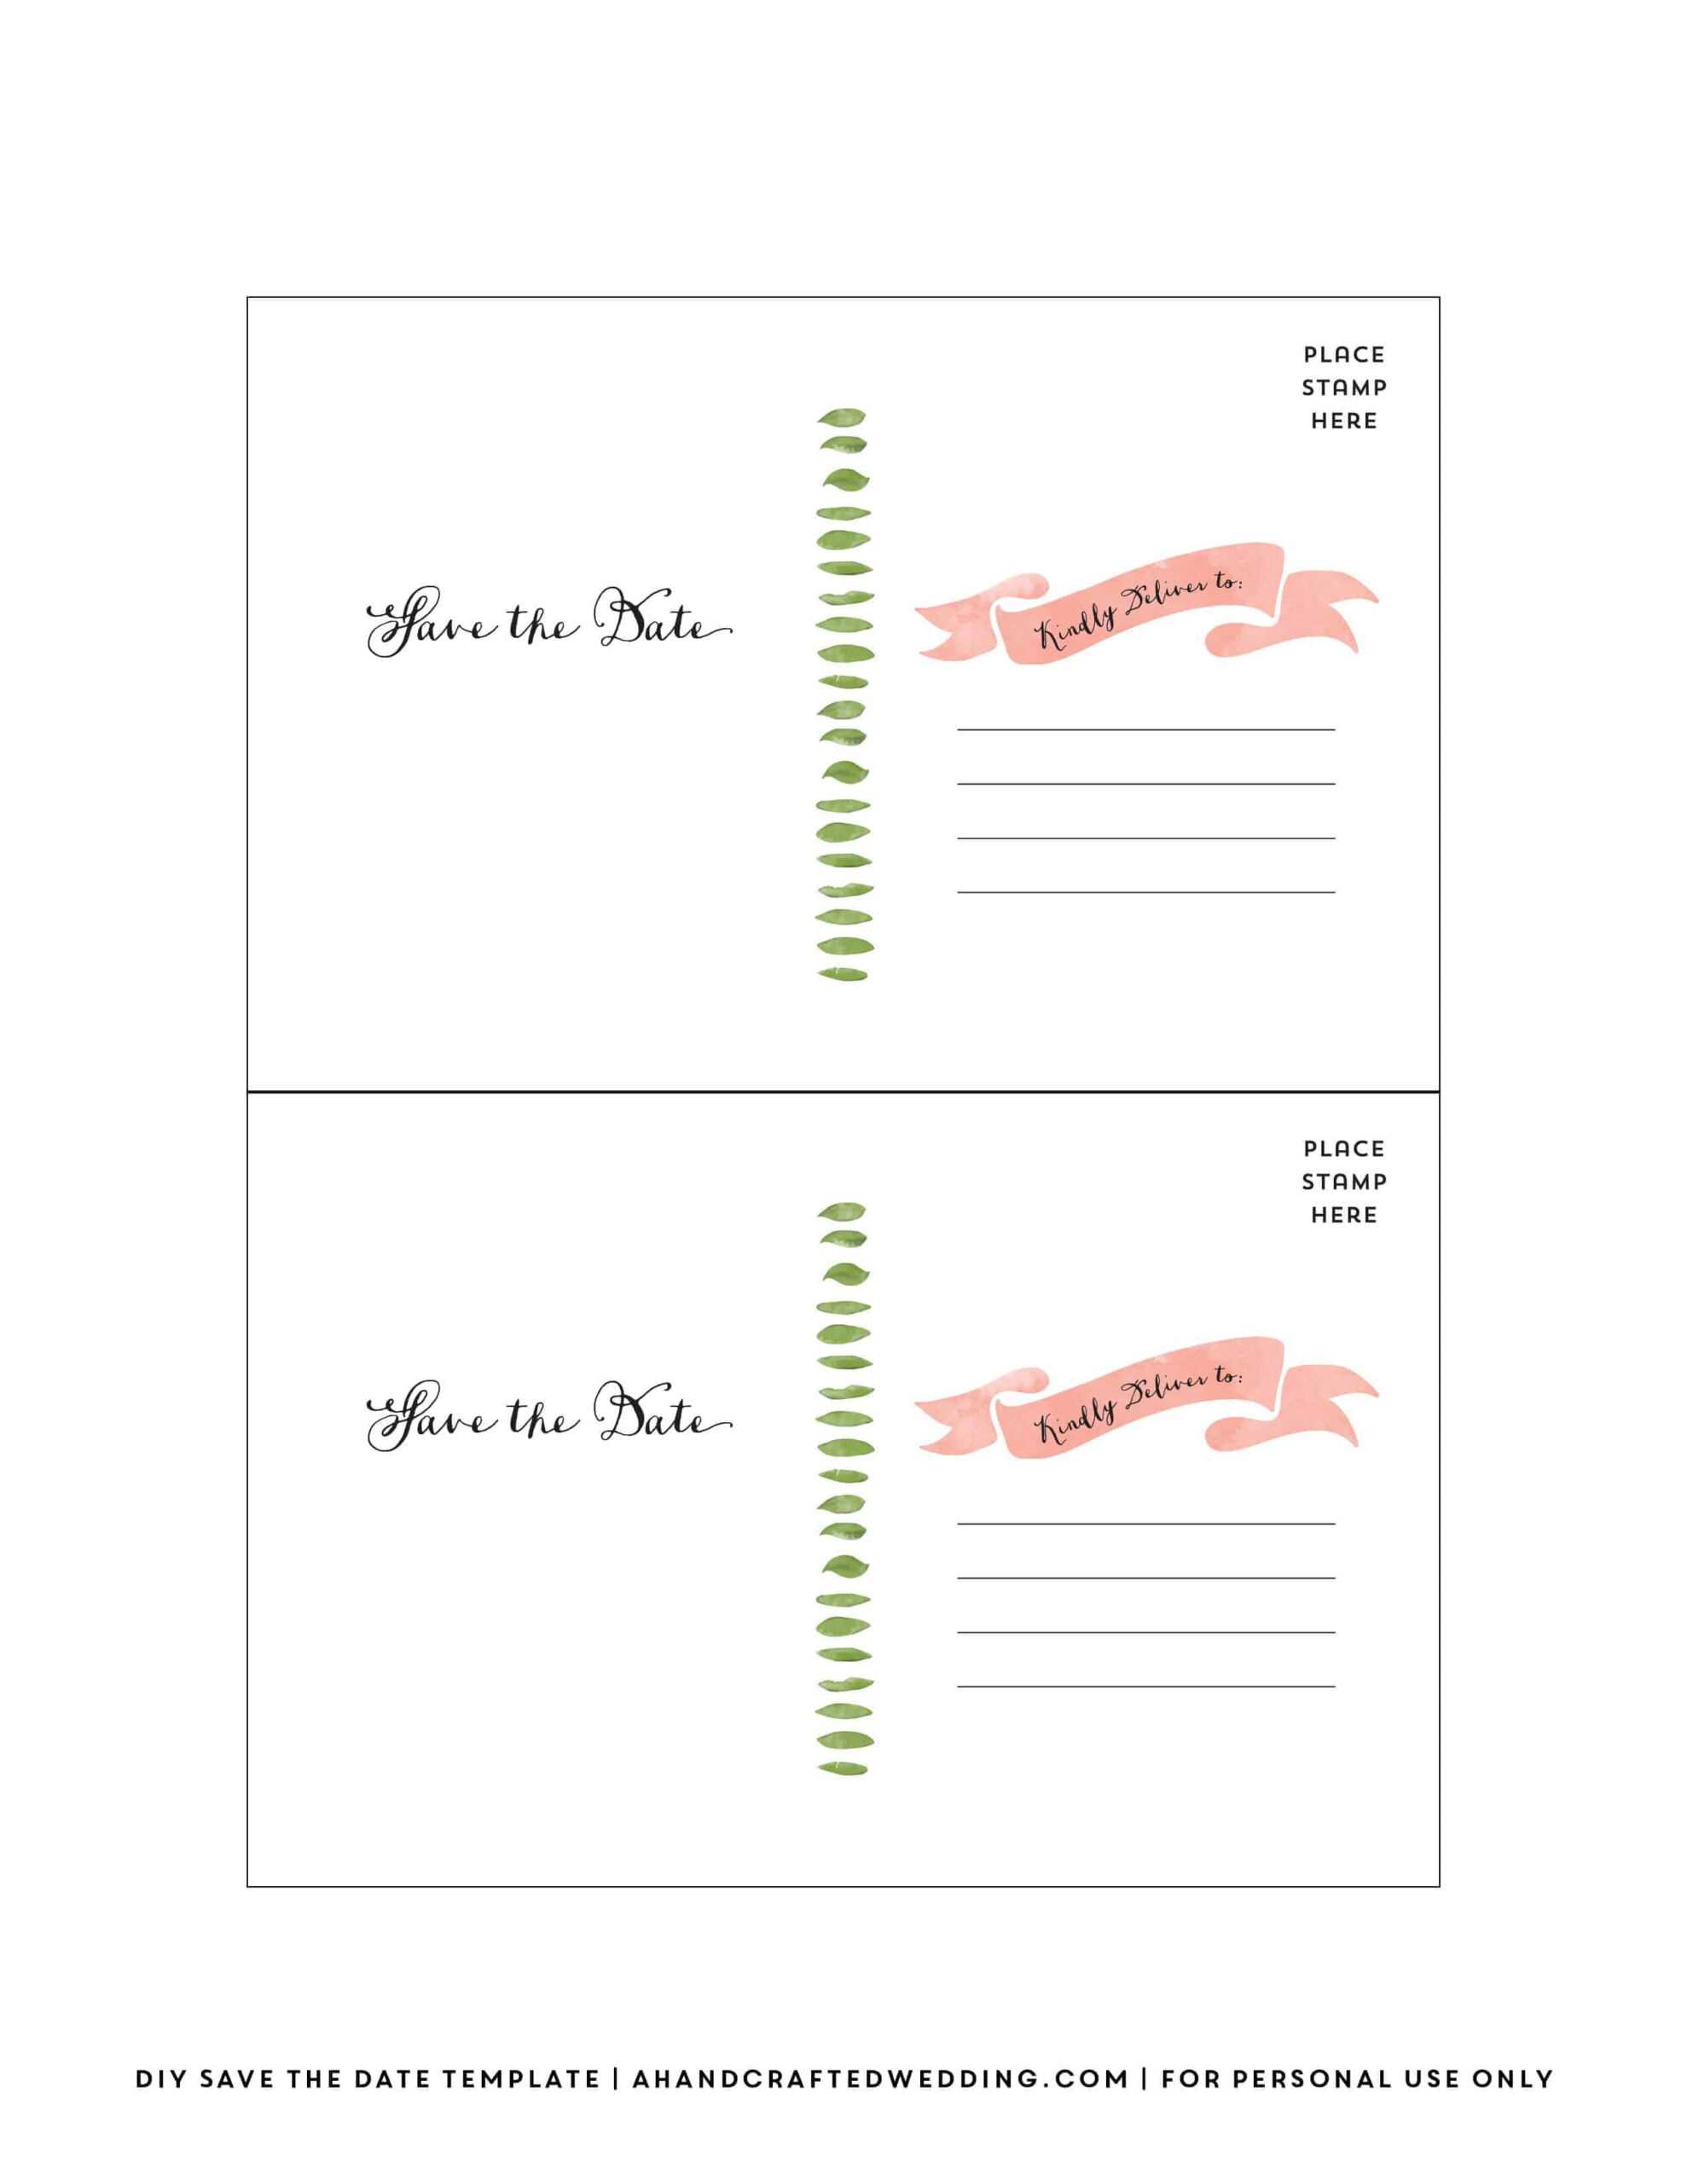 022 Per Page Diy Save The Date Postcard For Personal Use Regarding Free Postcard Template 4 Per Page